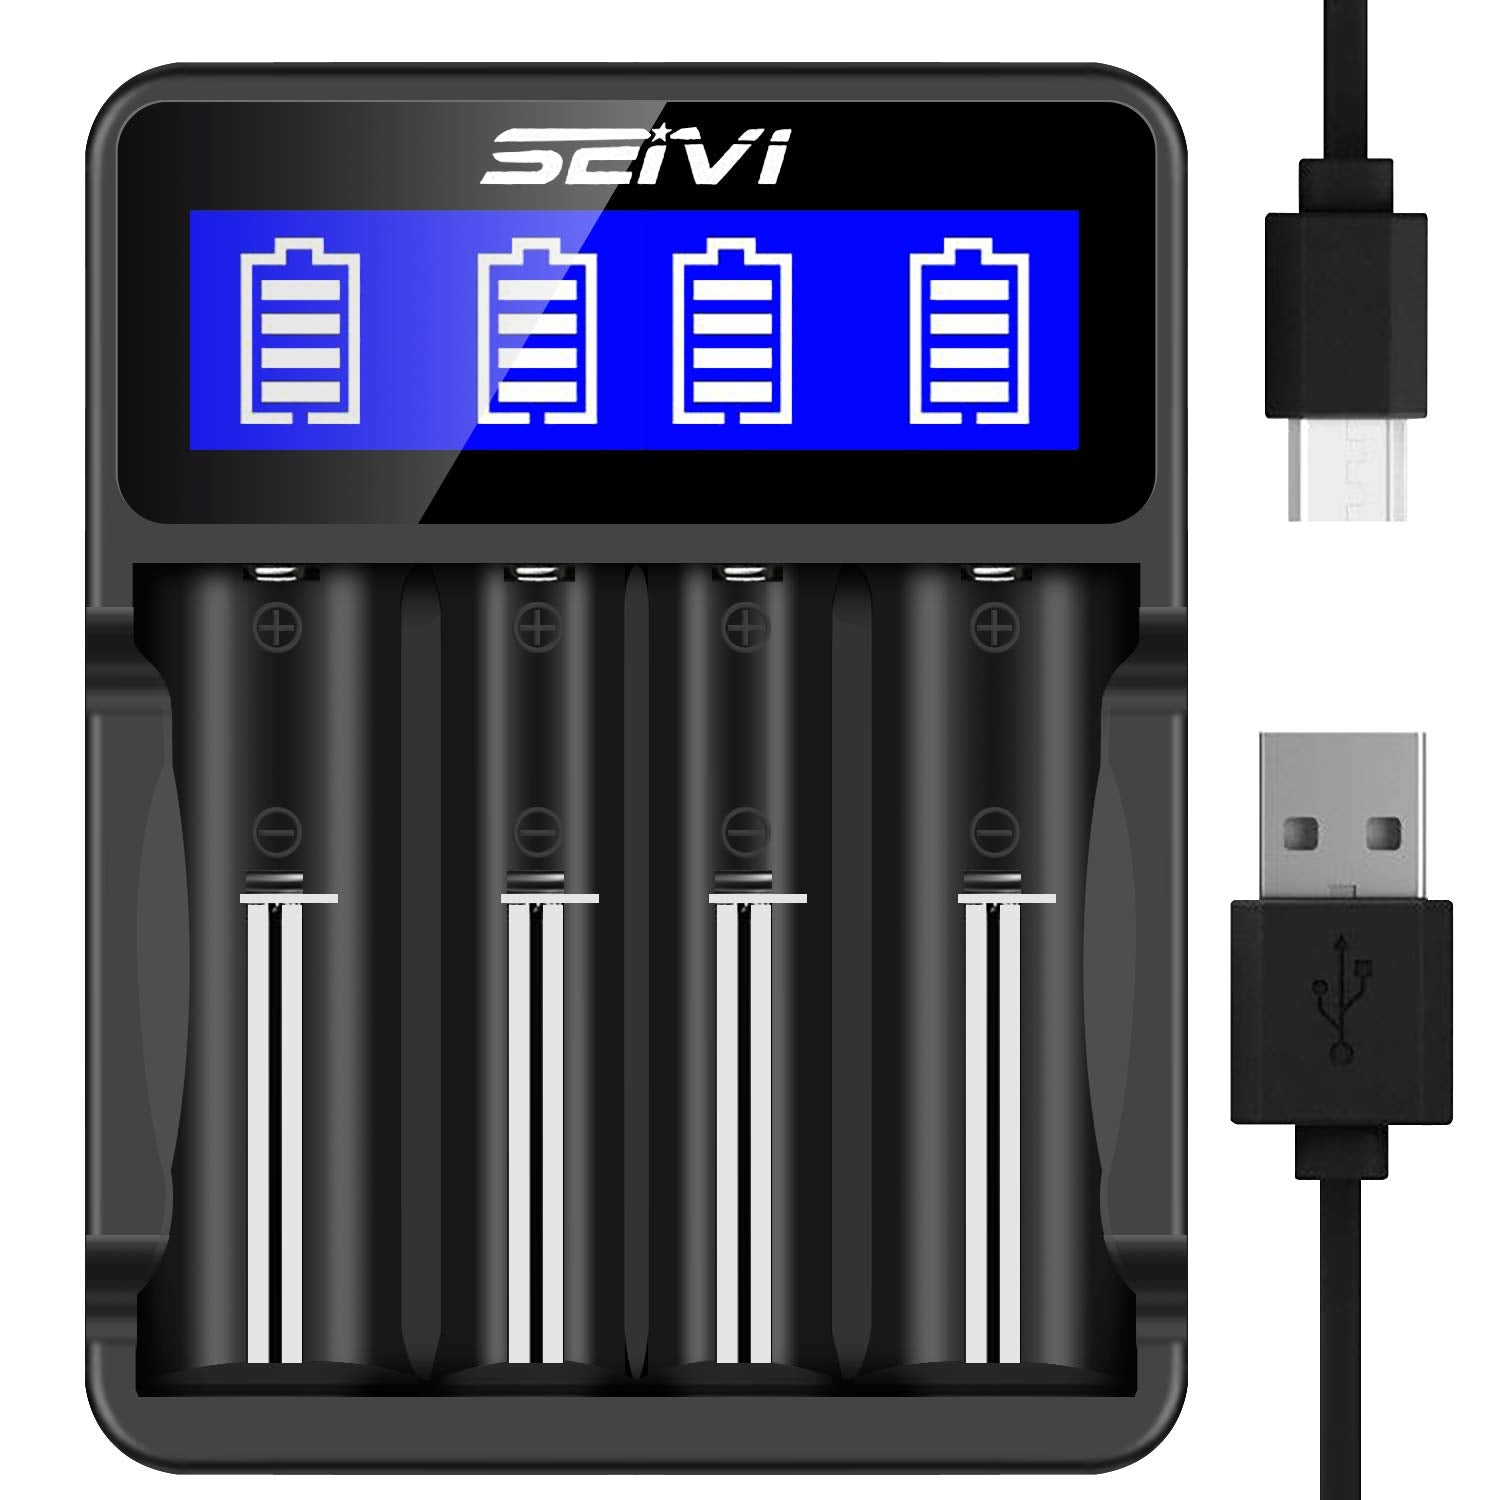 18650 Battery Charger, SEIVI LCD Display Universal Smart Charger for Rechargeable Batteries Li-ion Batteries 18650 26650 18490 17670 17500 16340 14500, Ni-MH/Ni-Cd A AA AAA Batteries